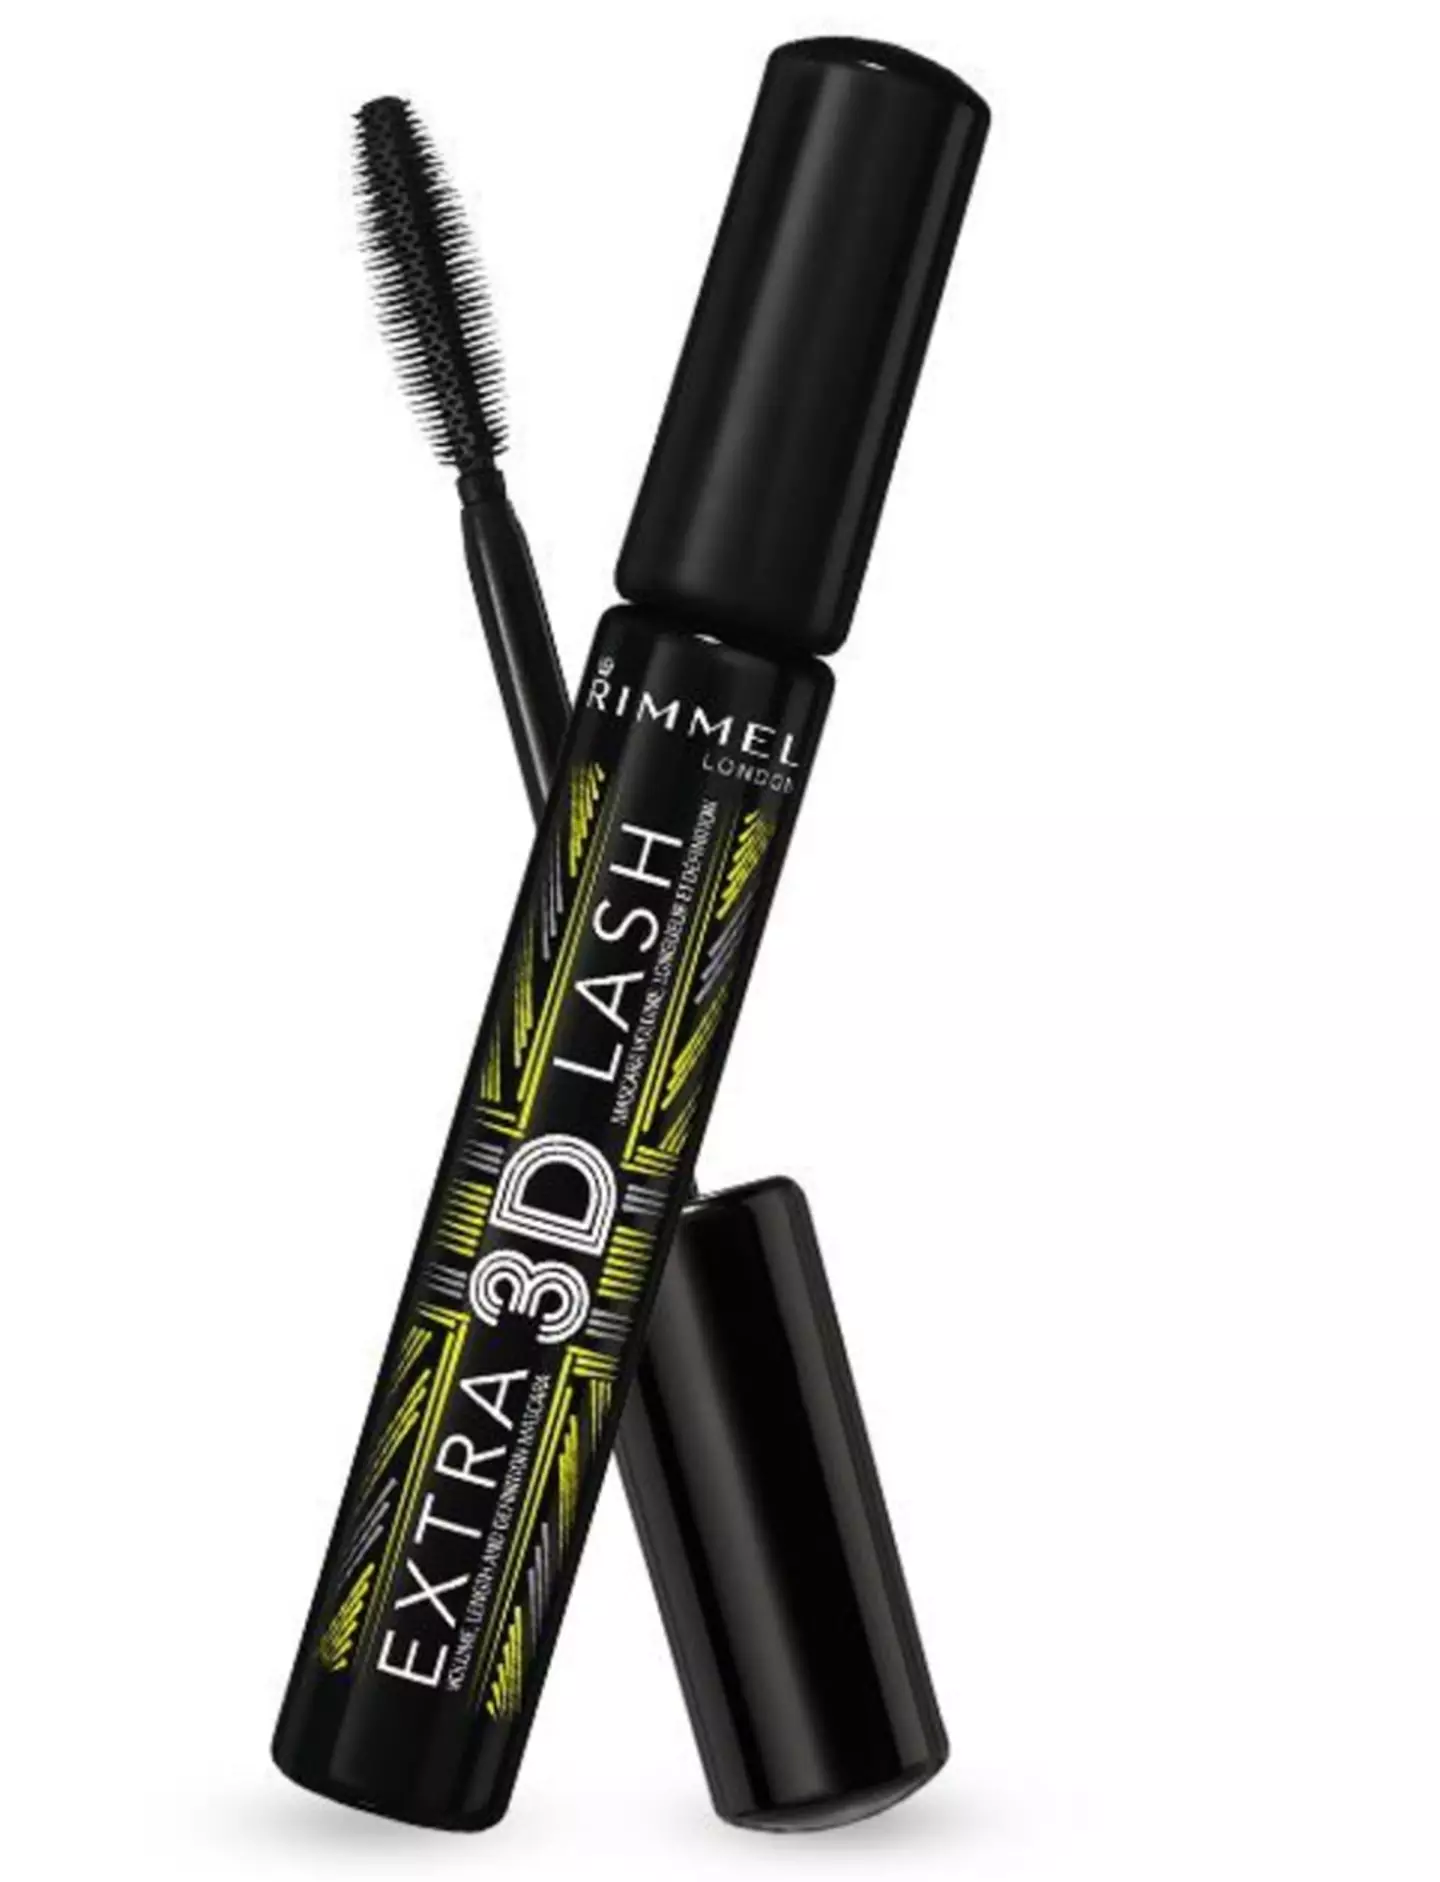 It turns out I’m not alone in my love for Rimmel’s Extra 3D Lash Volumising, Defining and Lengthening Mascara.